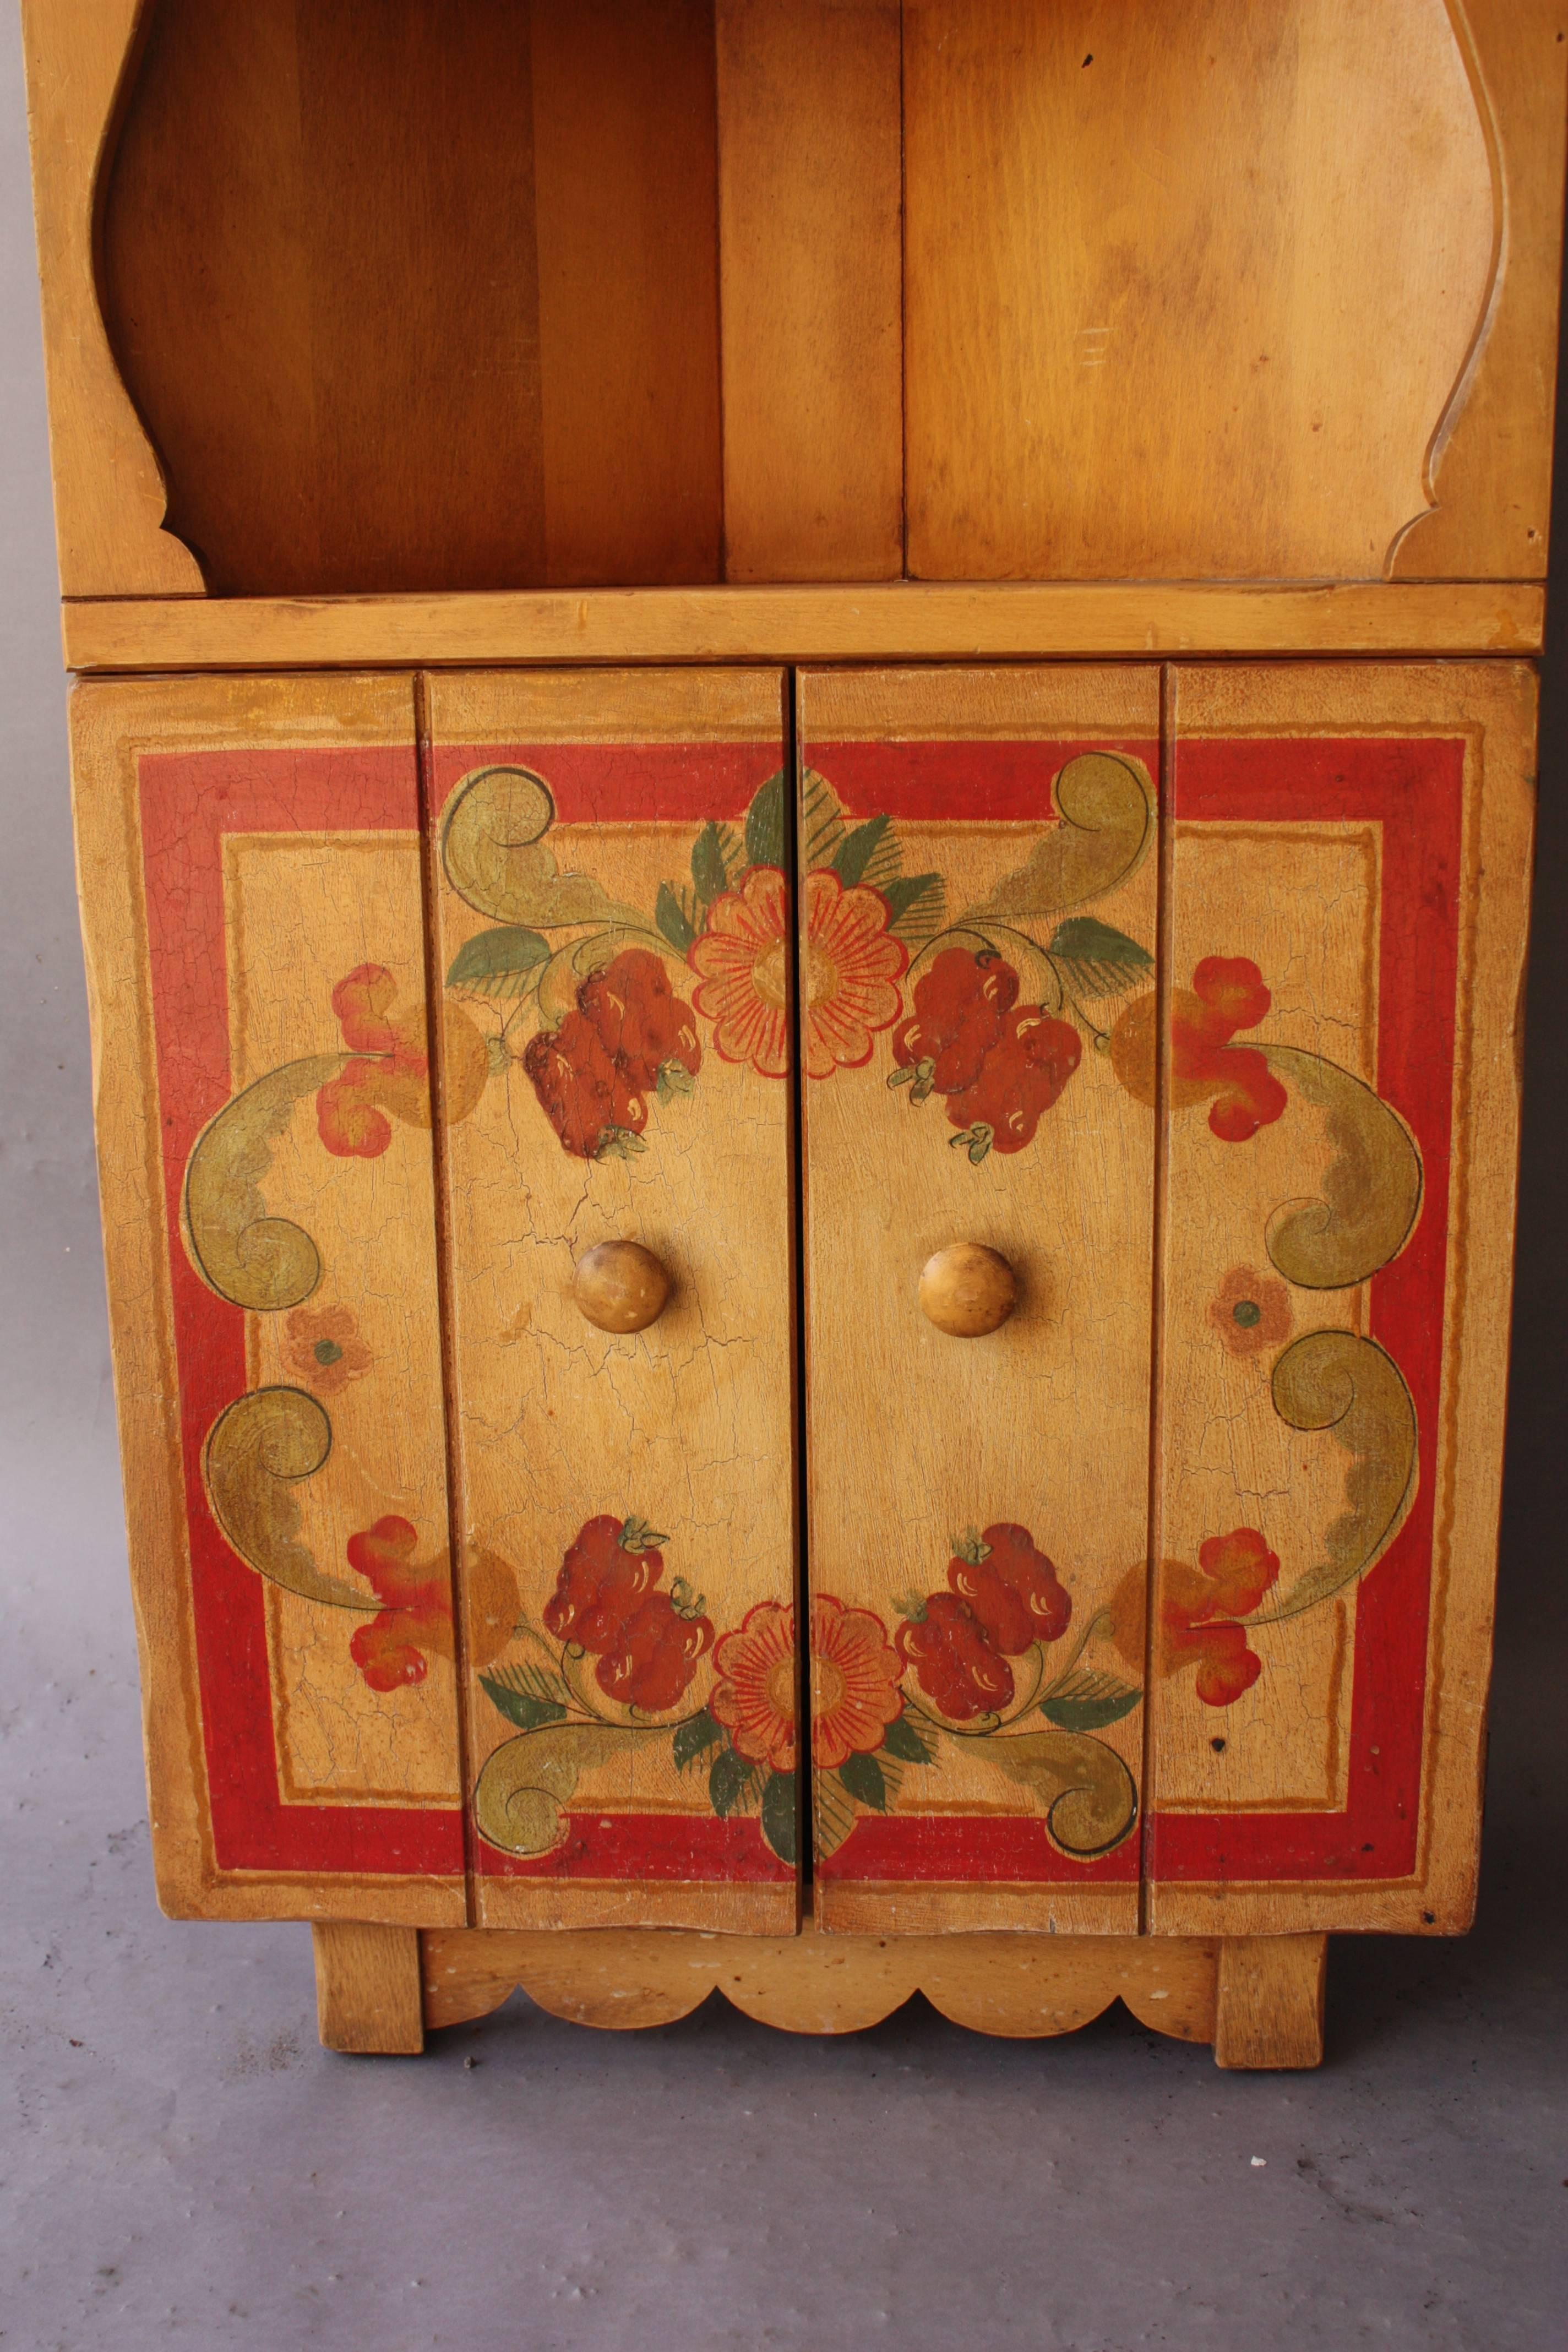 Monterey period corner hutch cabinet with original hand-painted floral decor.